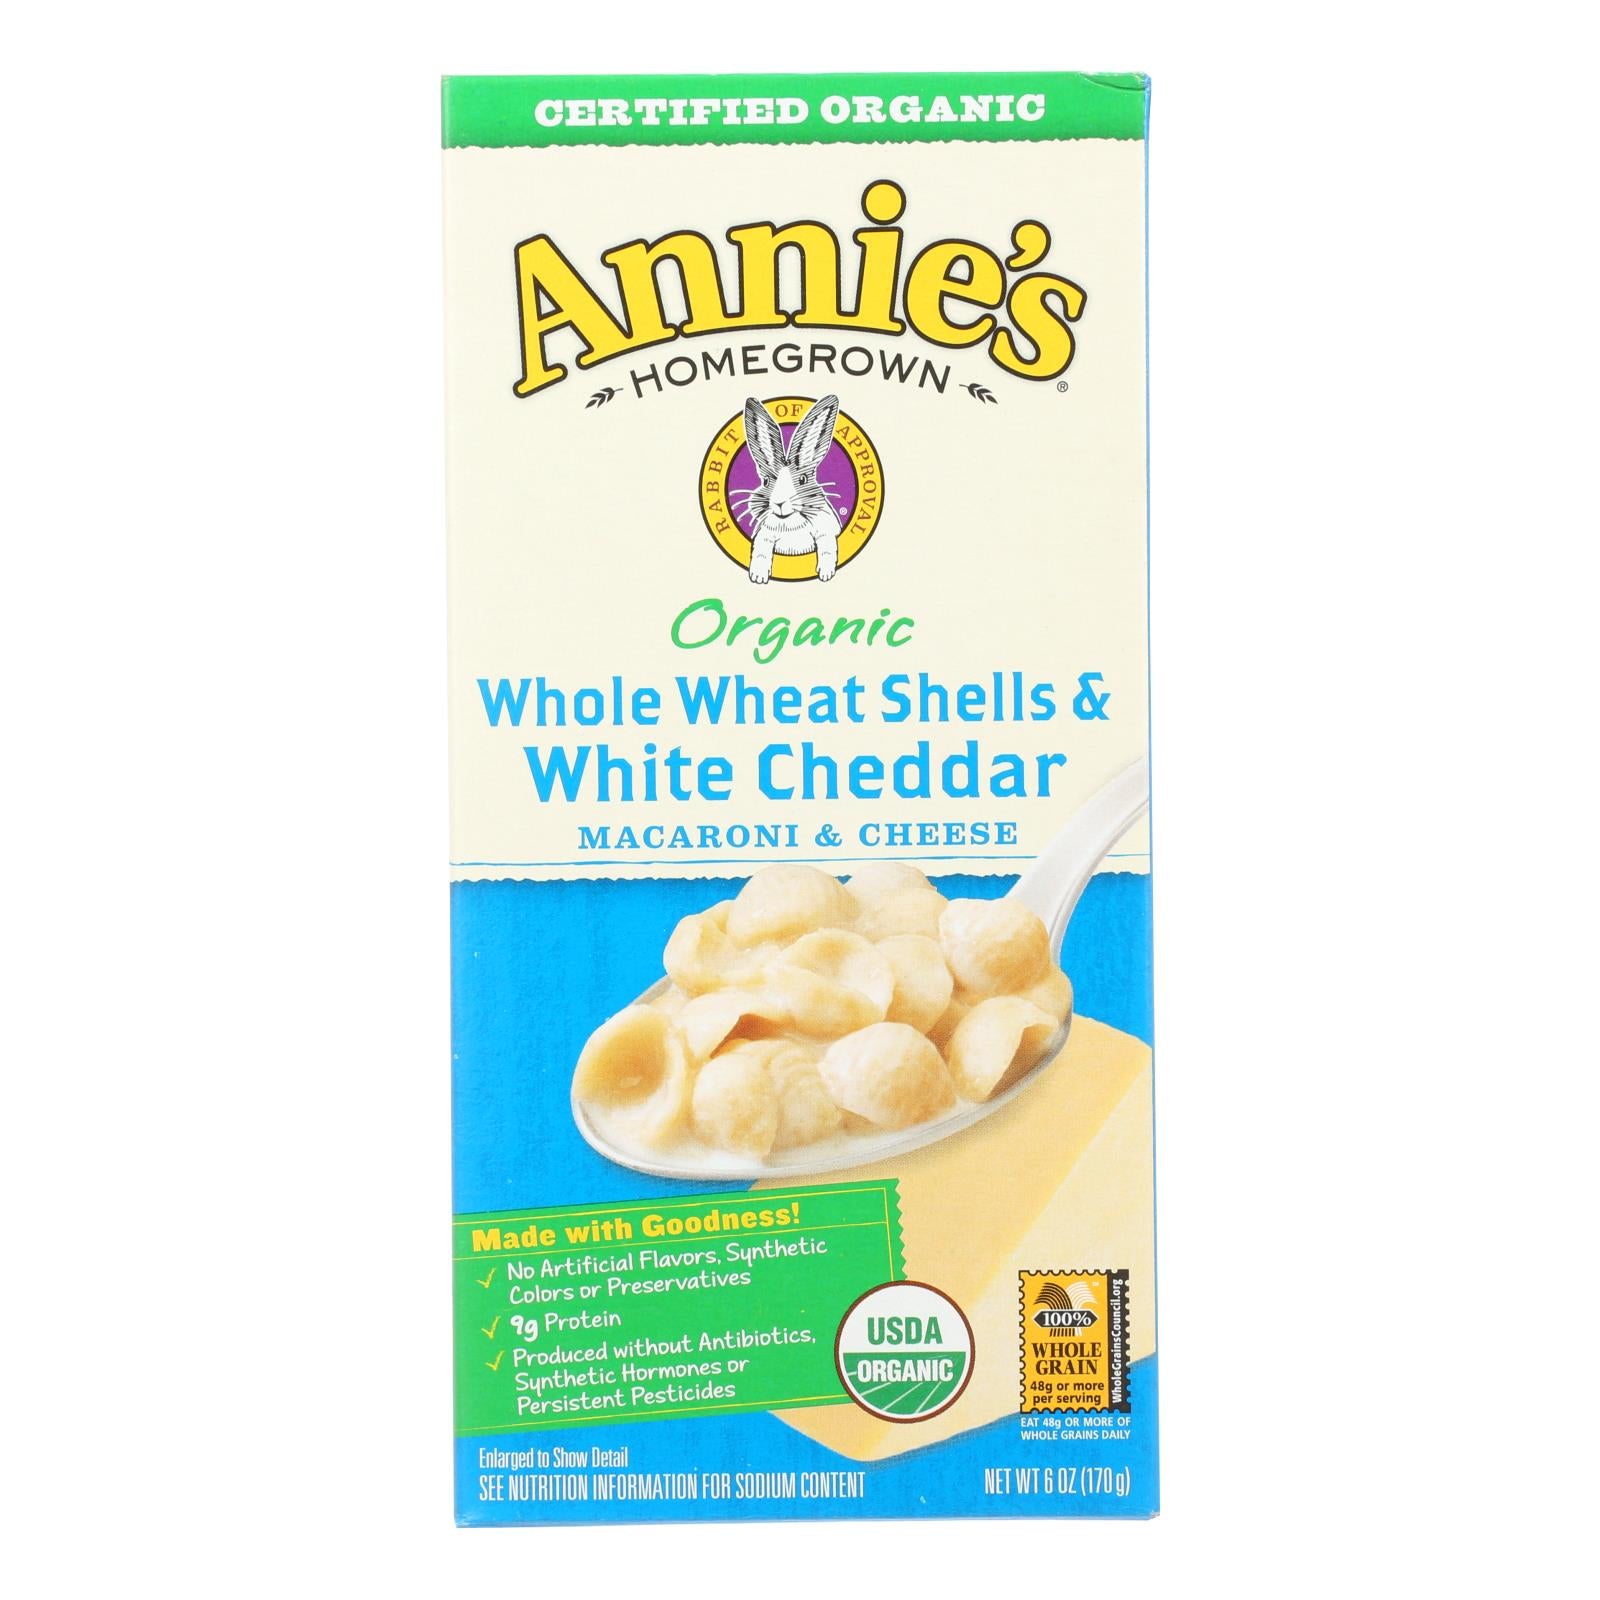 Annie'S Homegrown, Annies Homegrown Macaroni and Cheese - Organic - Whole Wheat Shells and White Cheddar - 6 oz - case of 12 (Pack of 12)